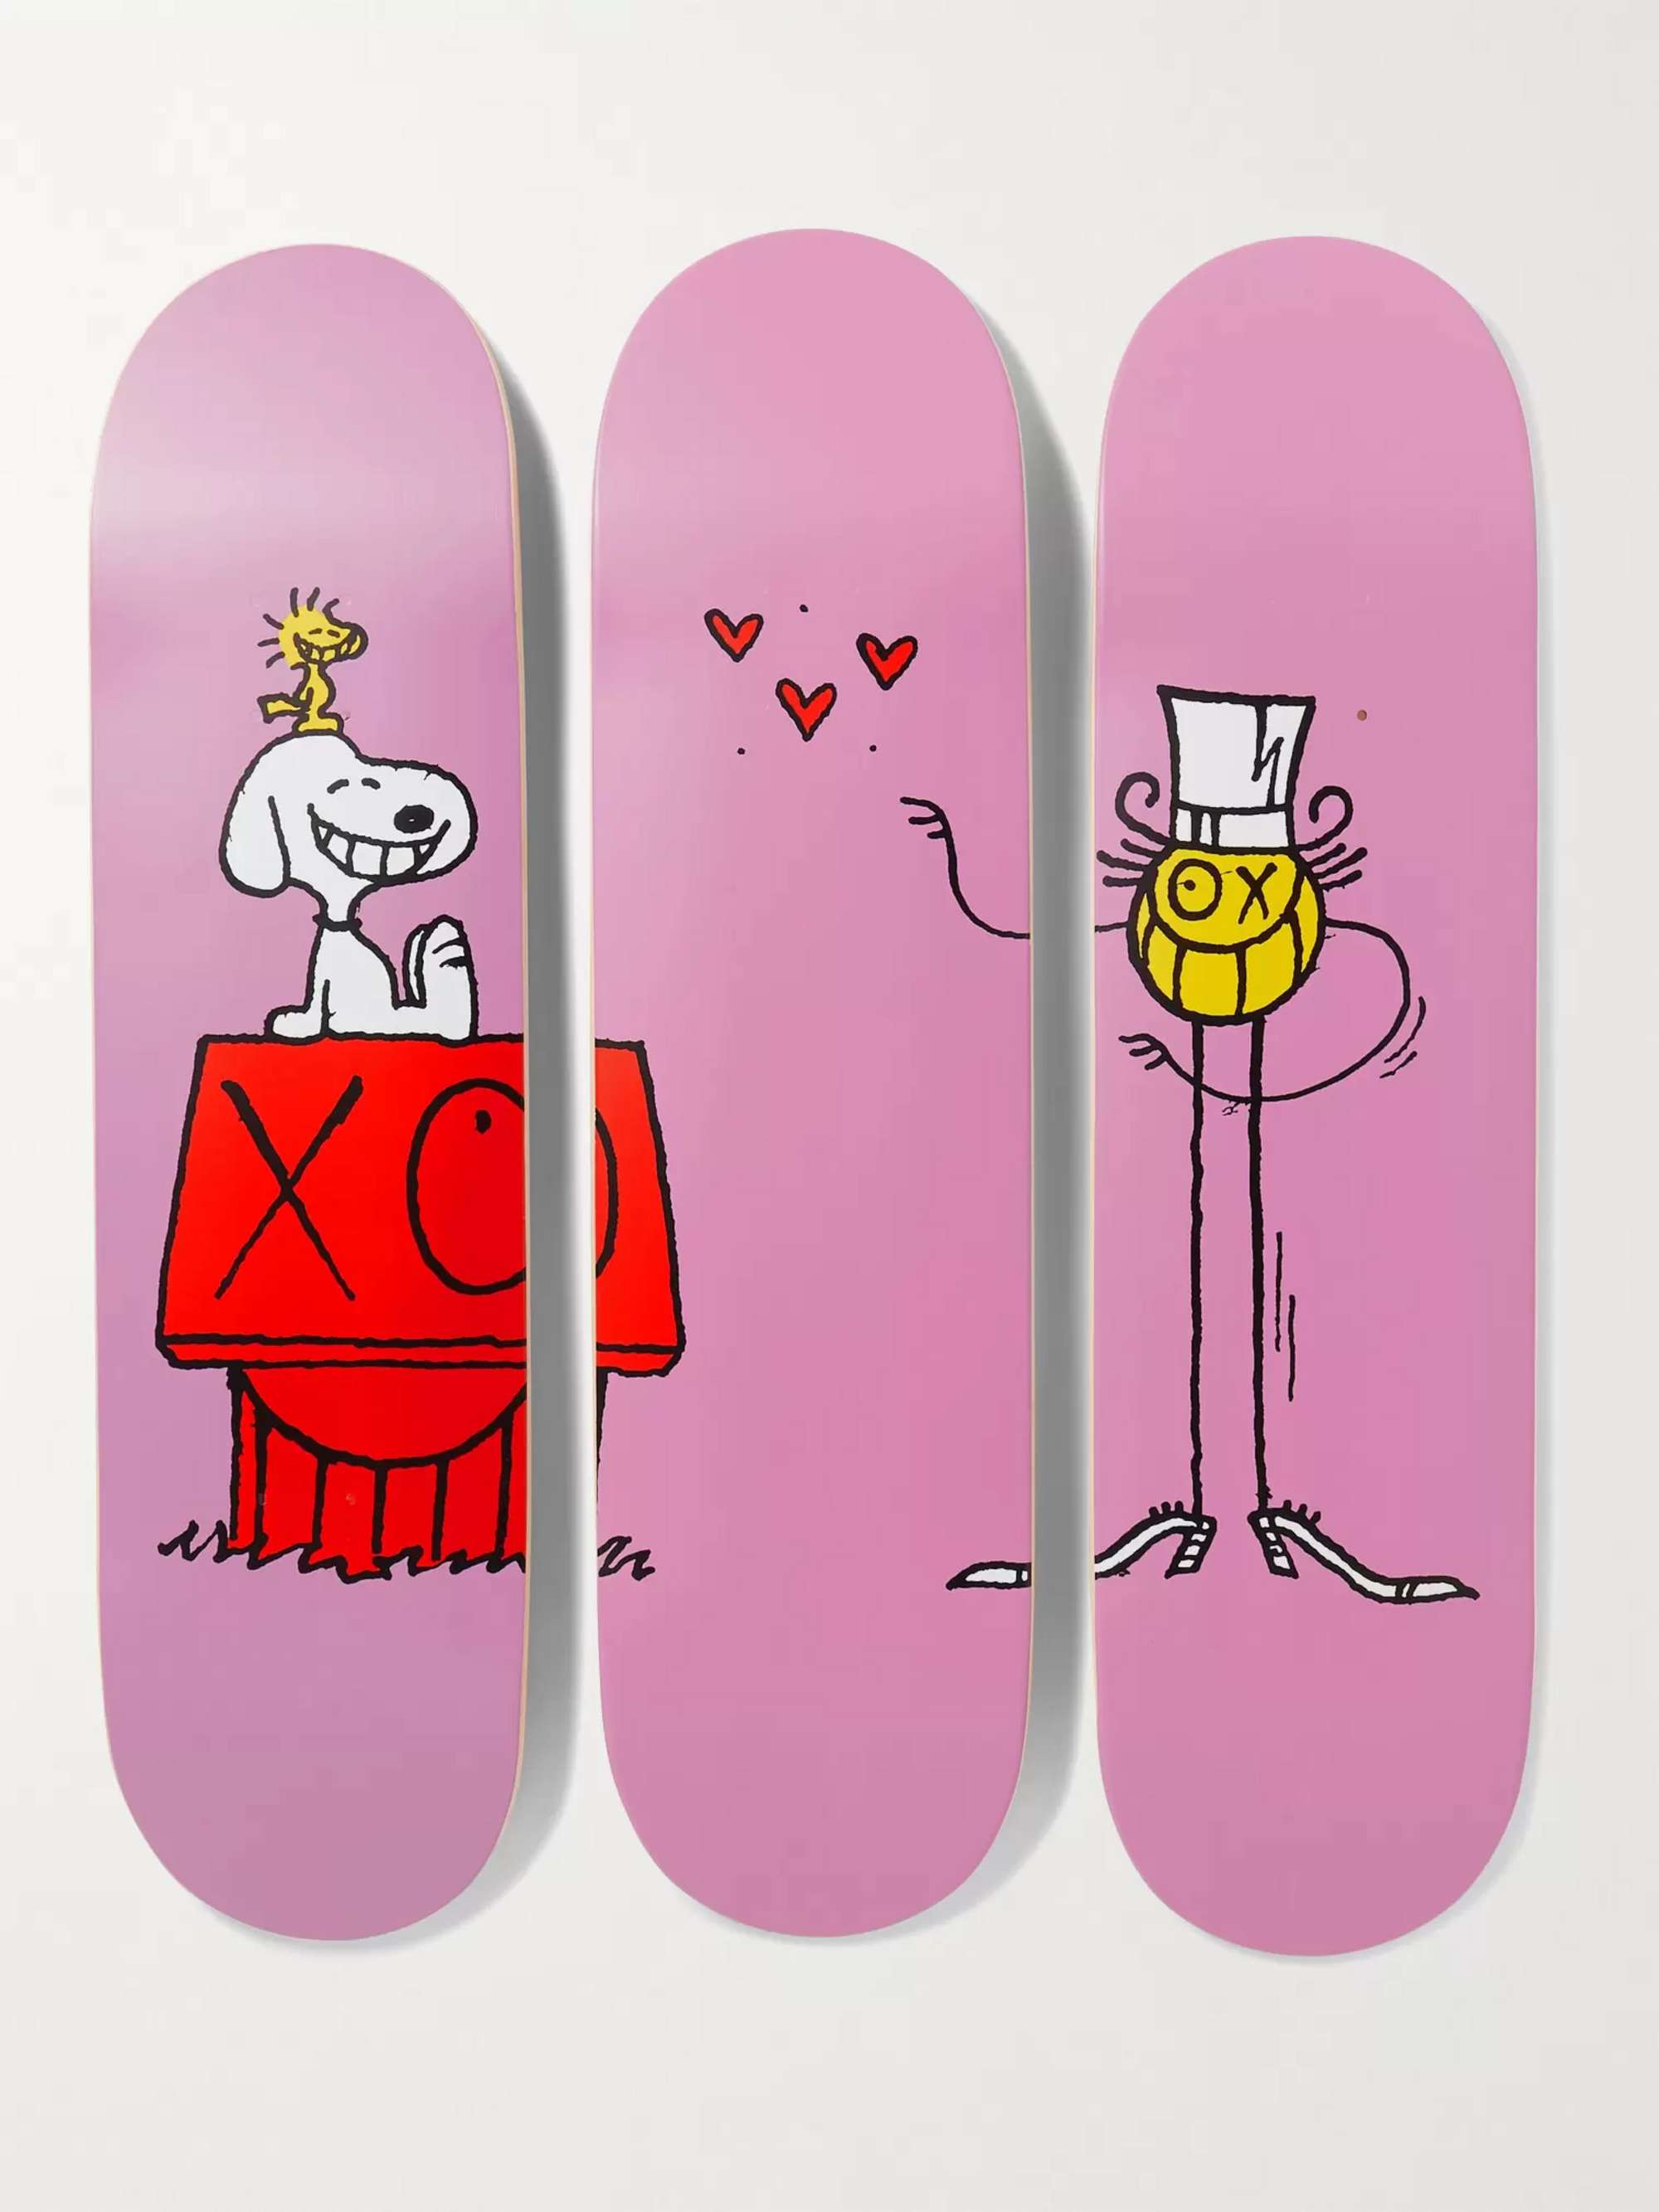 THE SKATEROOM + Peanuts by André Saraiva Set of Three Printed Wooden Skateboards